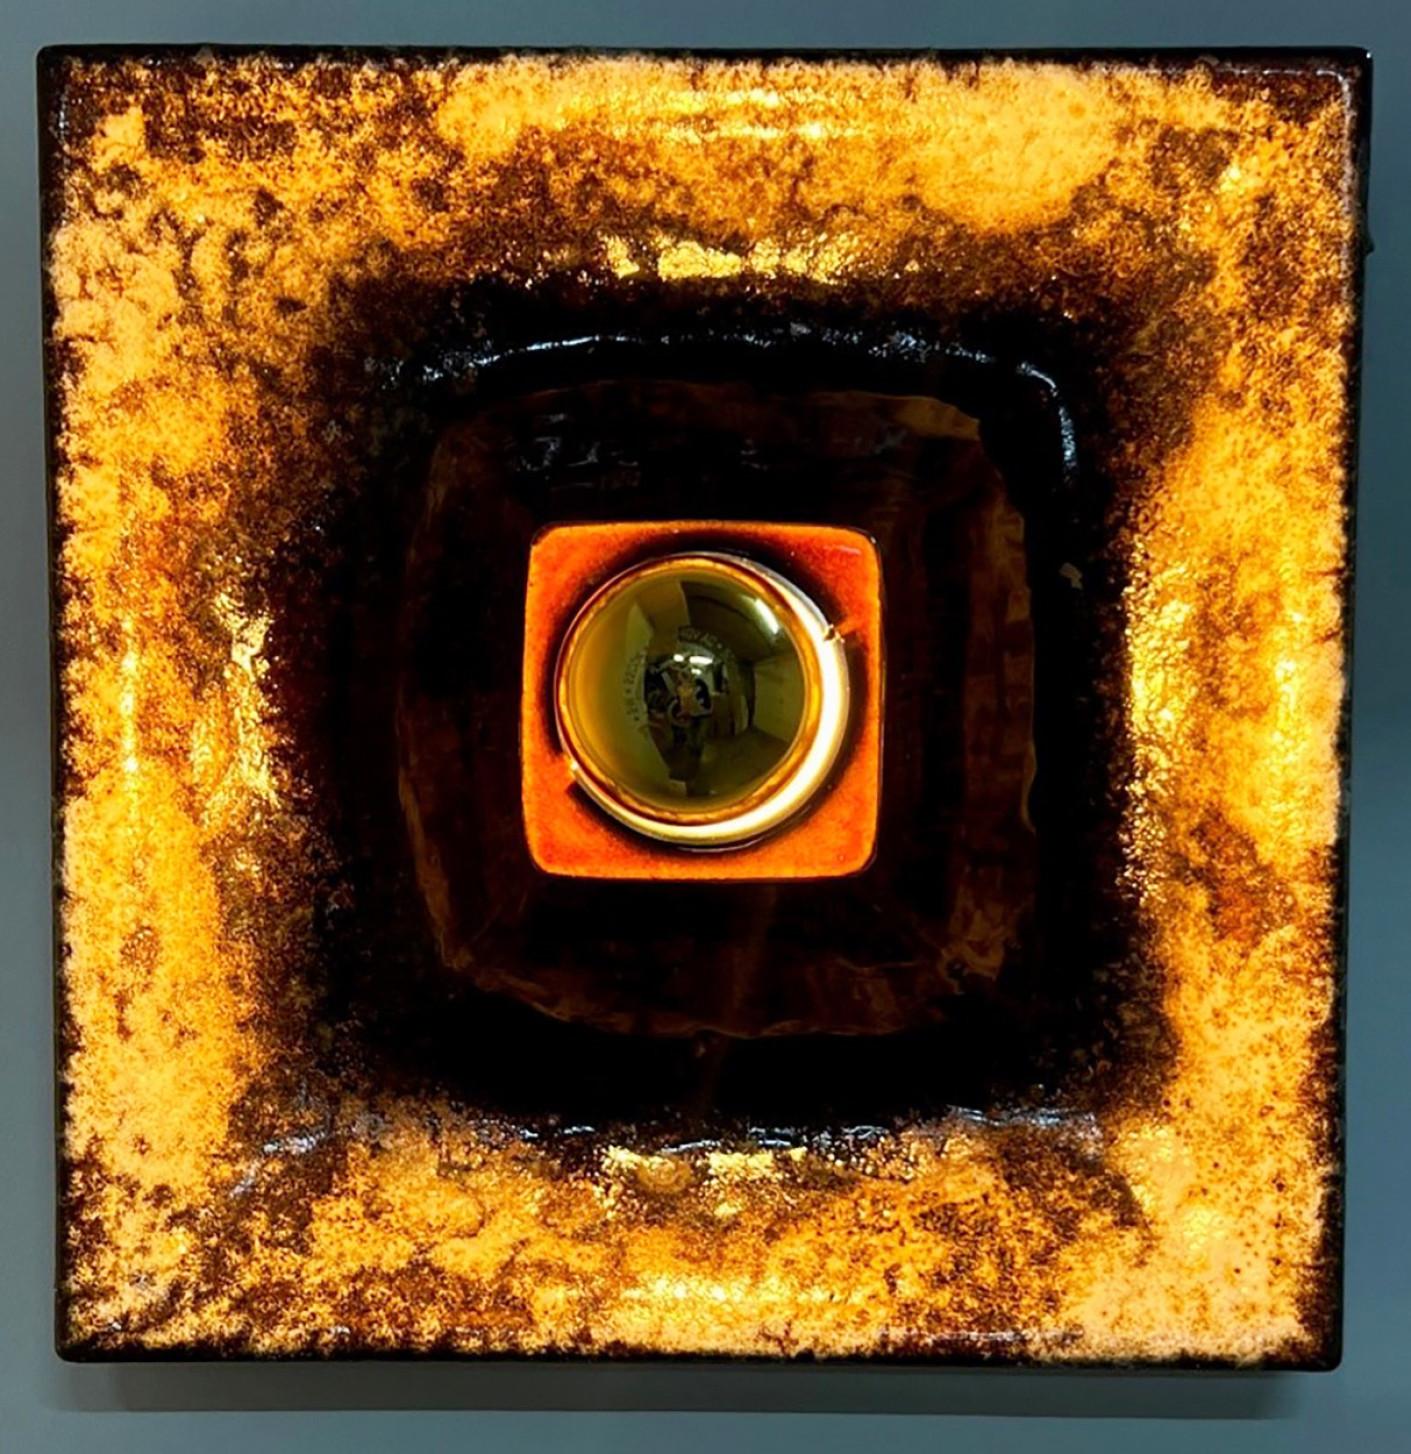 Glazed Brown Square Ceramic Wall Lights by Hustadt Keramik, Germany, 1970 For Sale